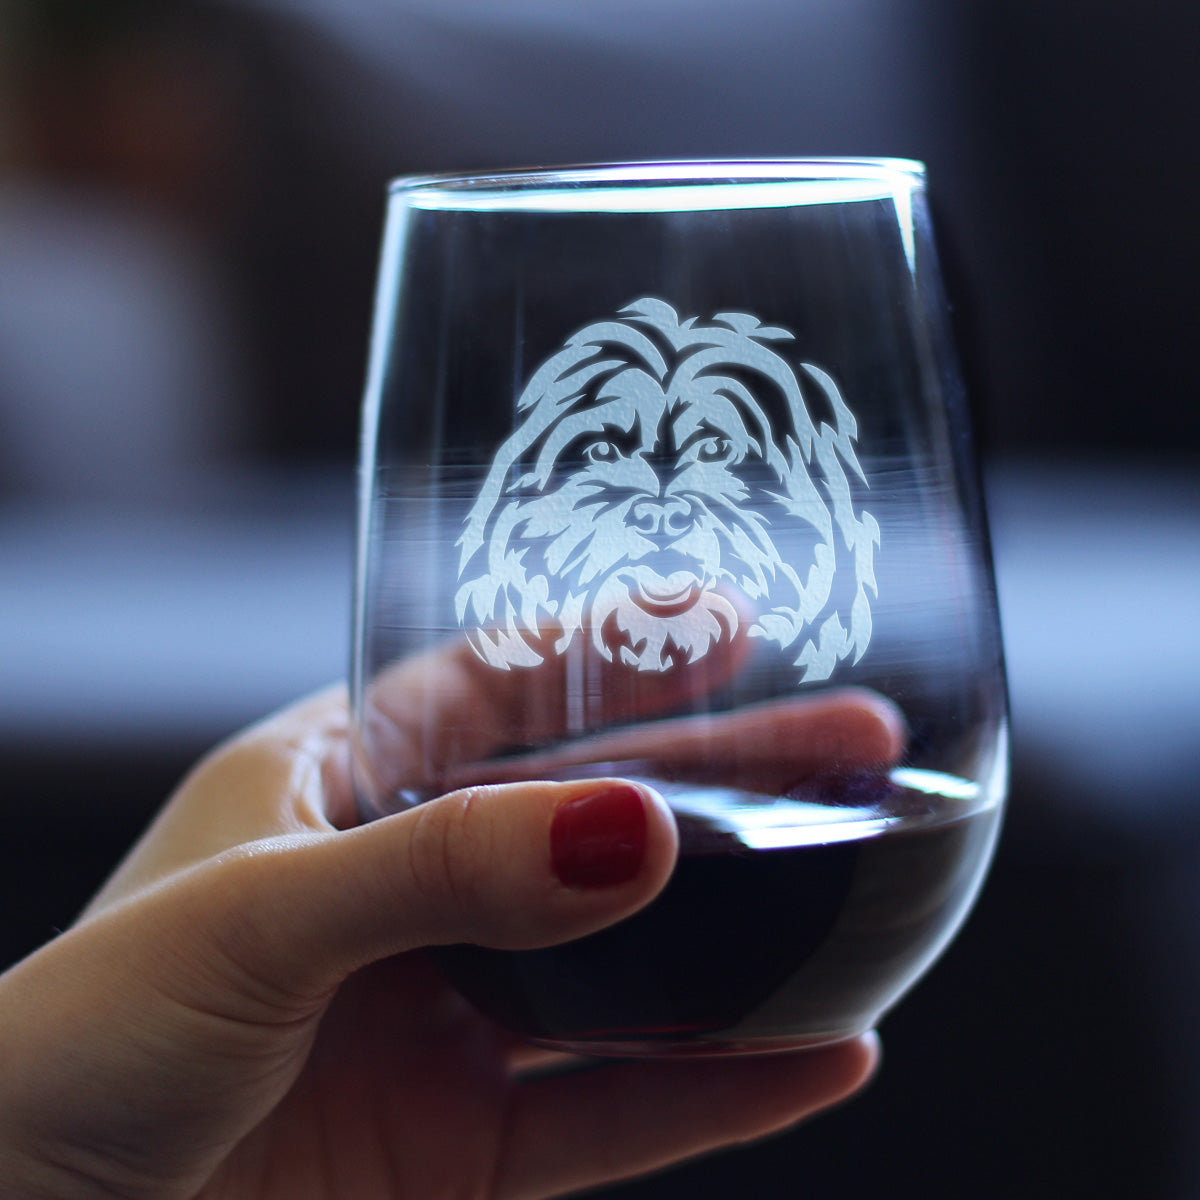 Shih Tzu Face Stemless Wine Glass - Cute Dog Themed Decor and Gifts for Moms &amp; Dads of Shih Tzus - Large 17 Oz